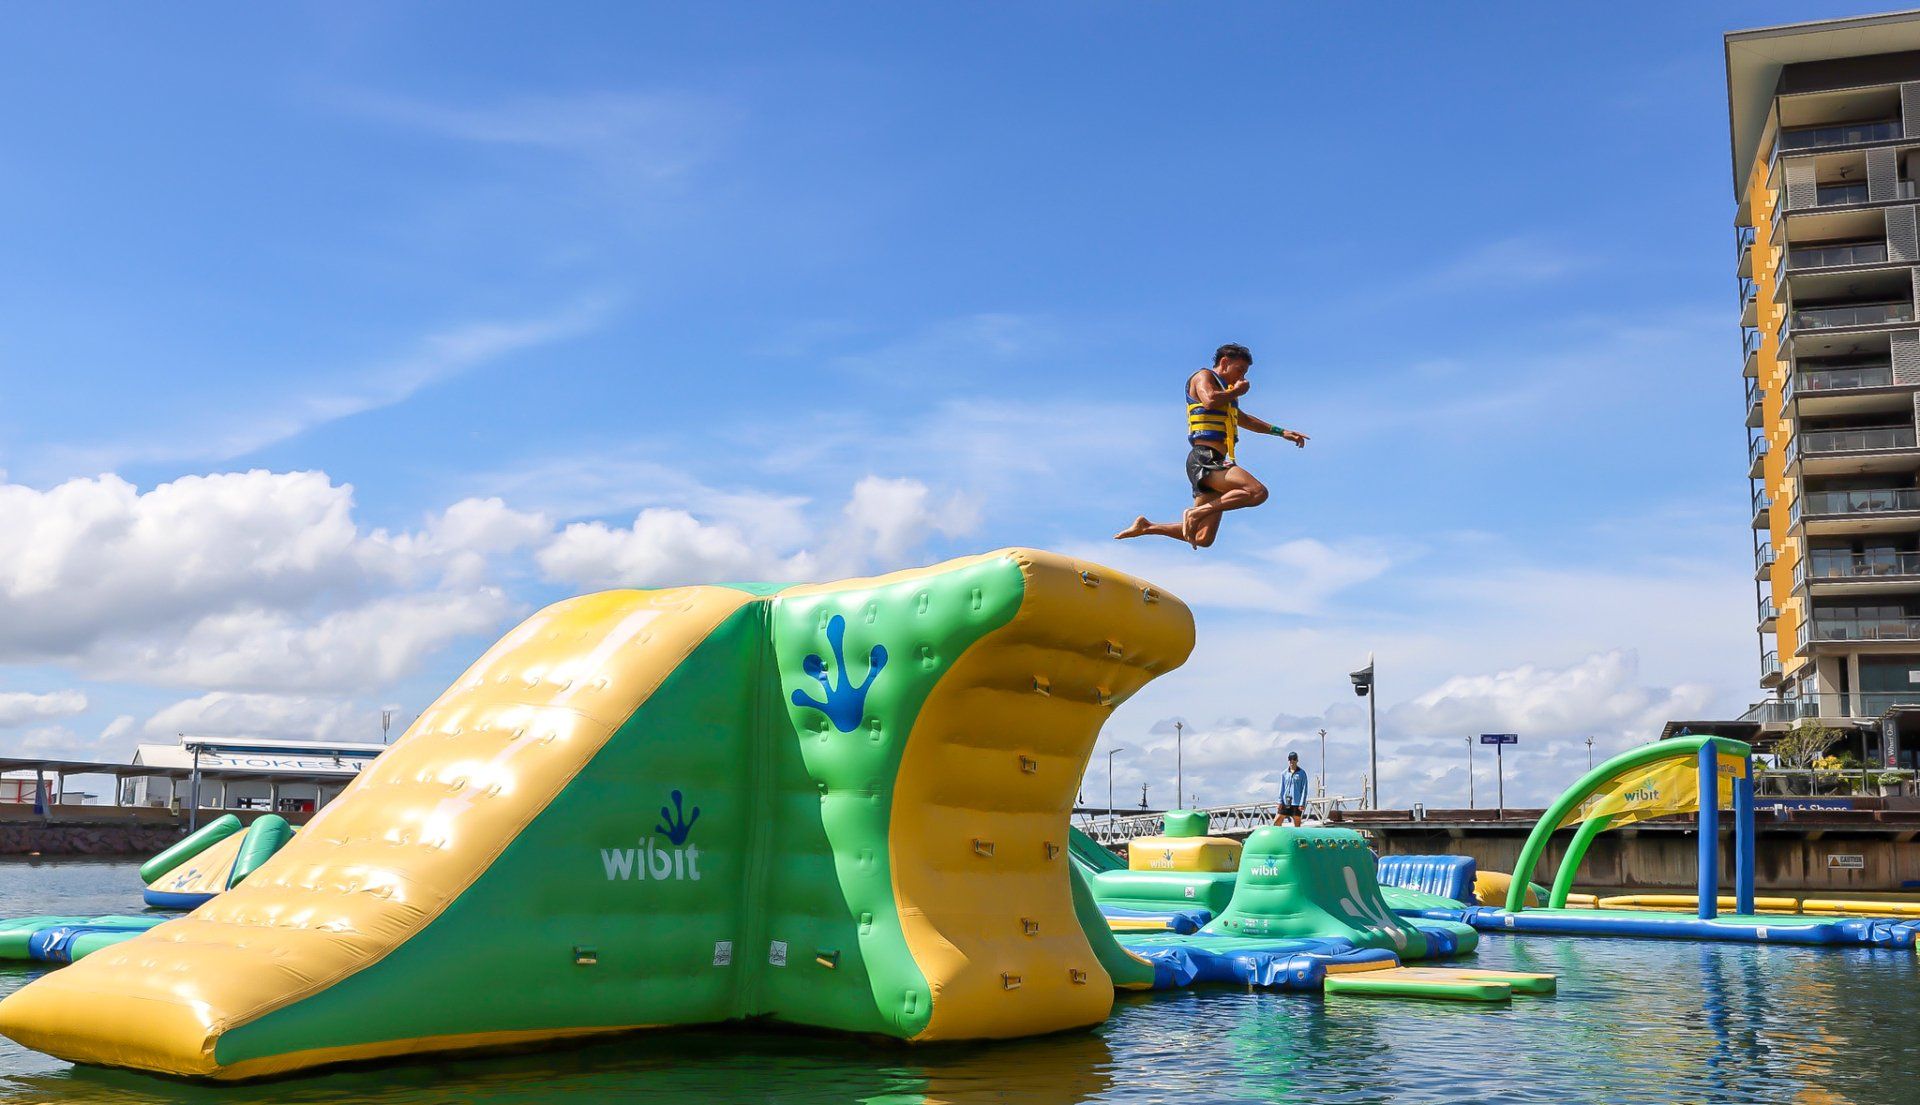 A young man jumps off of the Wibit Aqua Park into the water